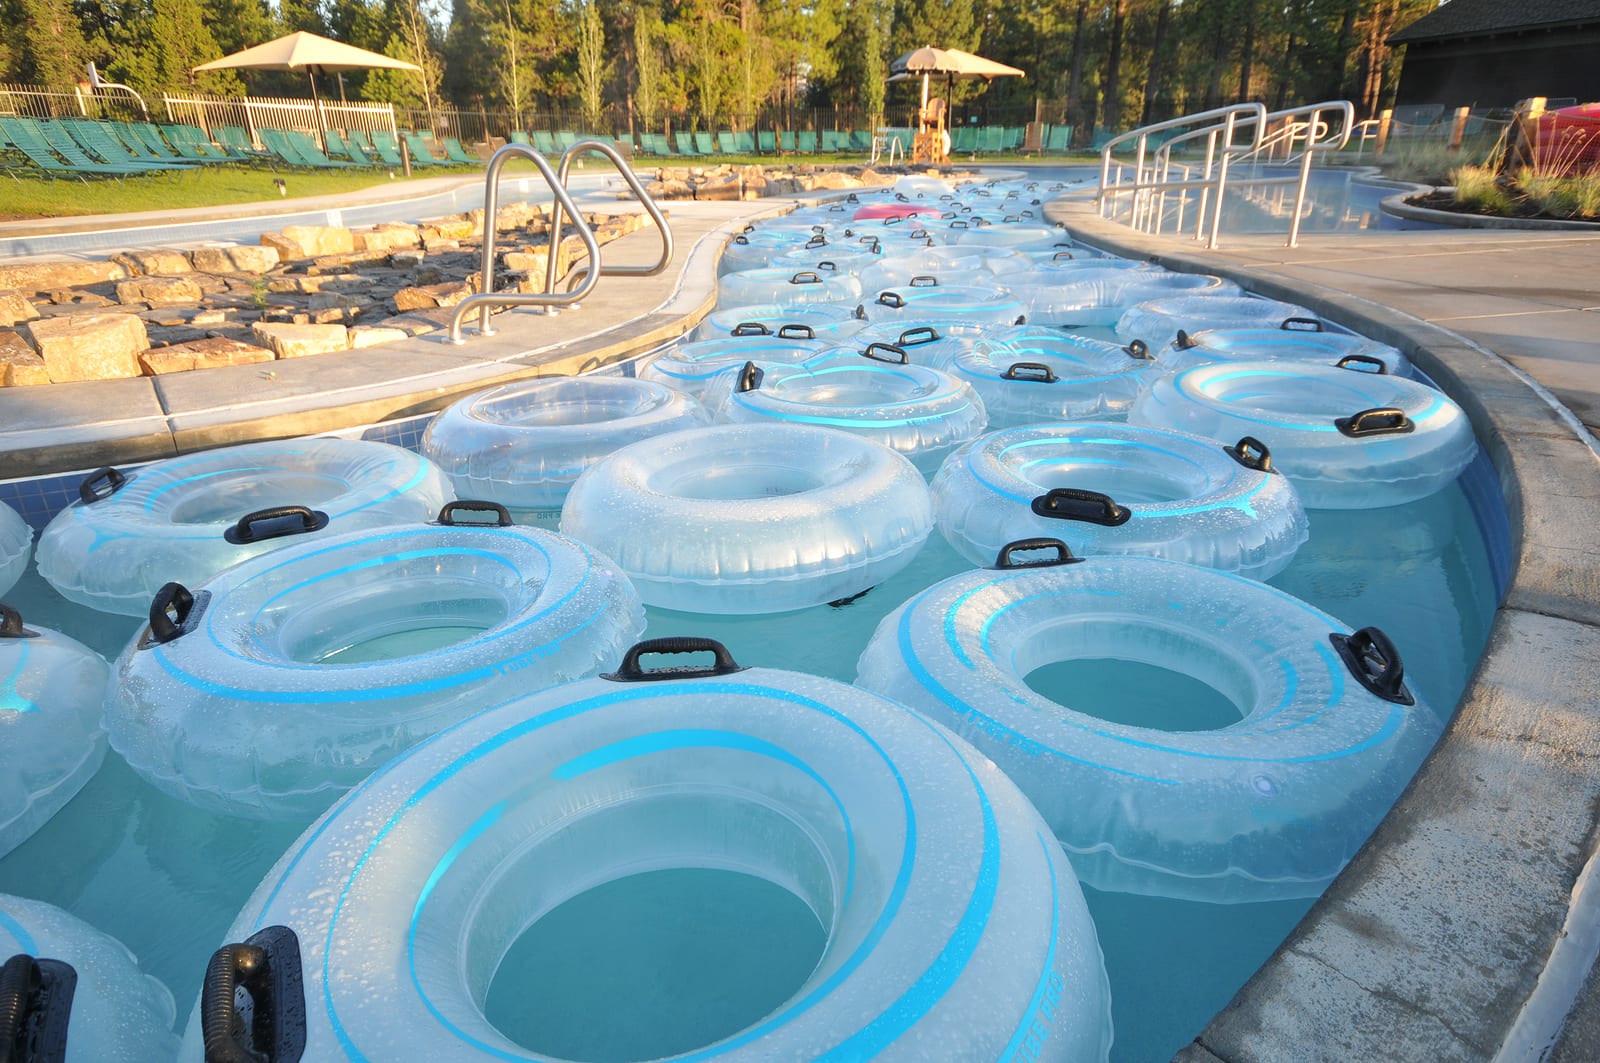 Central Oregon water park with many inner tubes floating in a pool